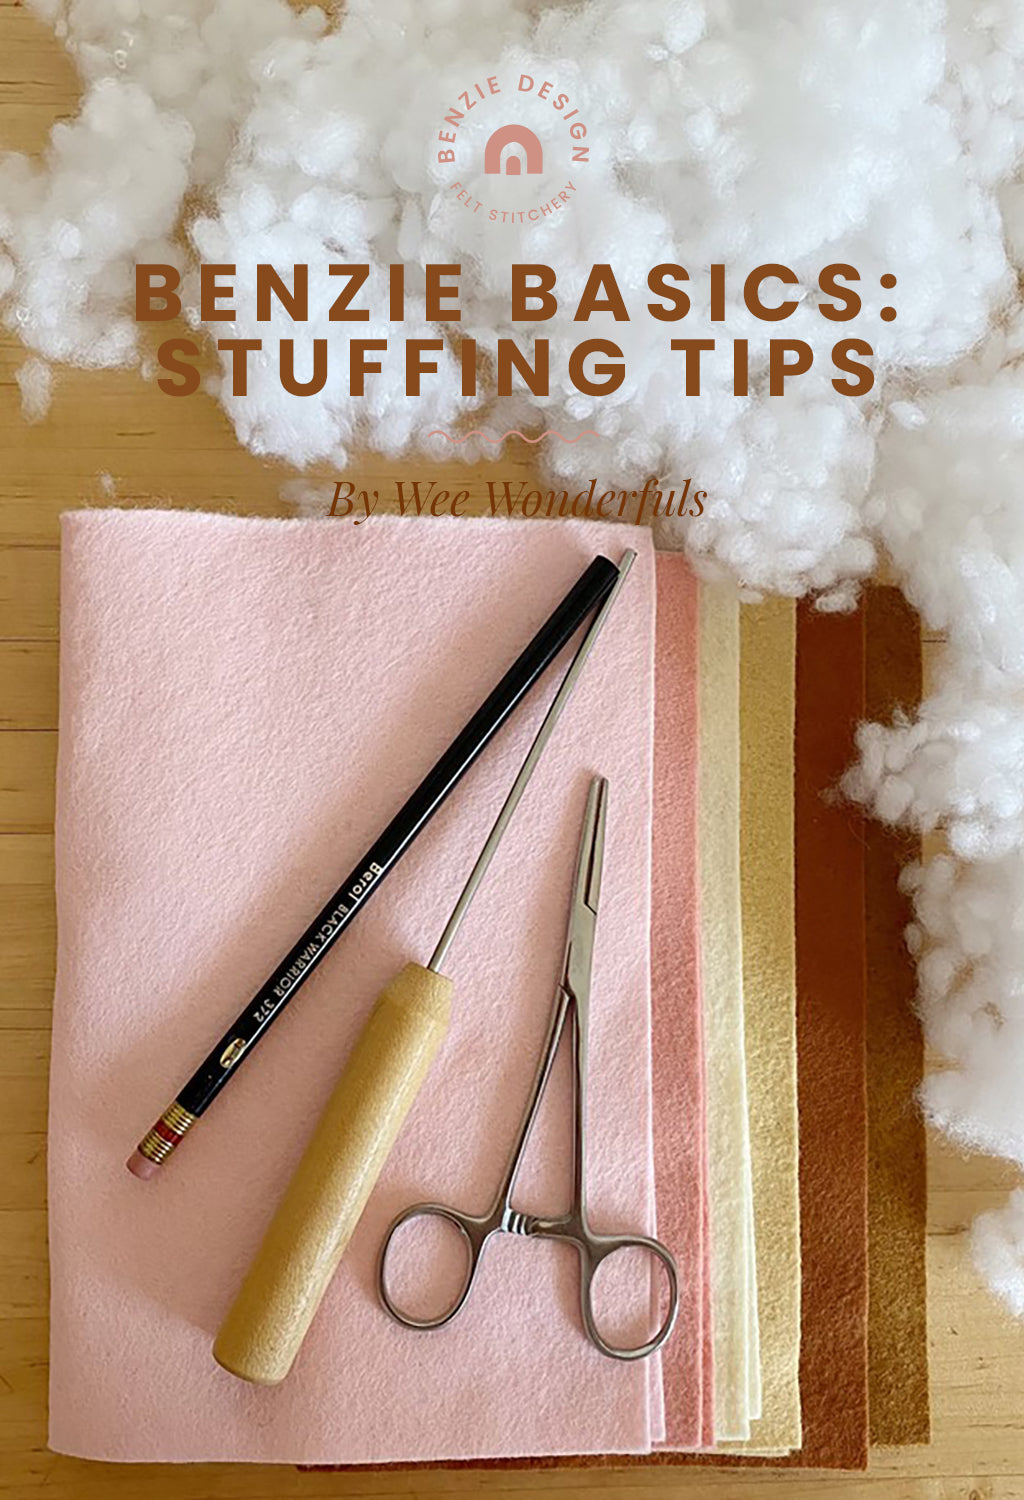 Sewing With Plush Fabric  Tips & Tricks - You Make It Simple